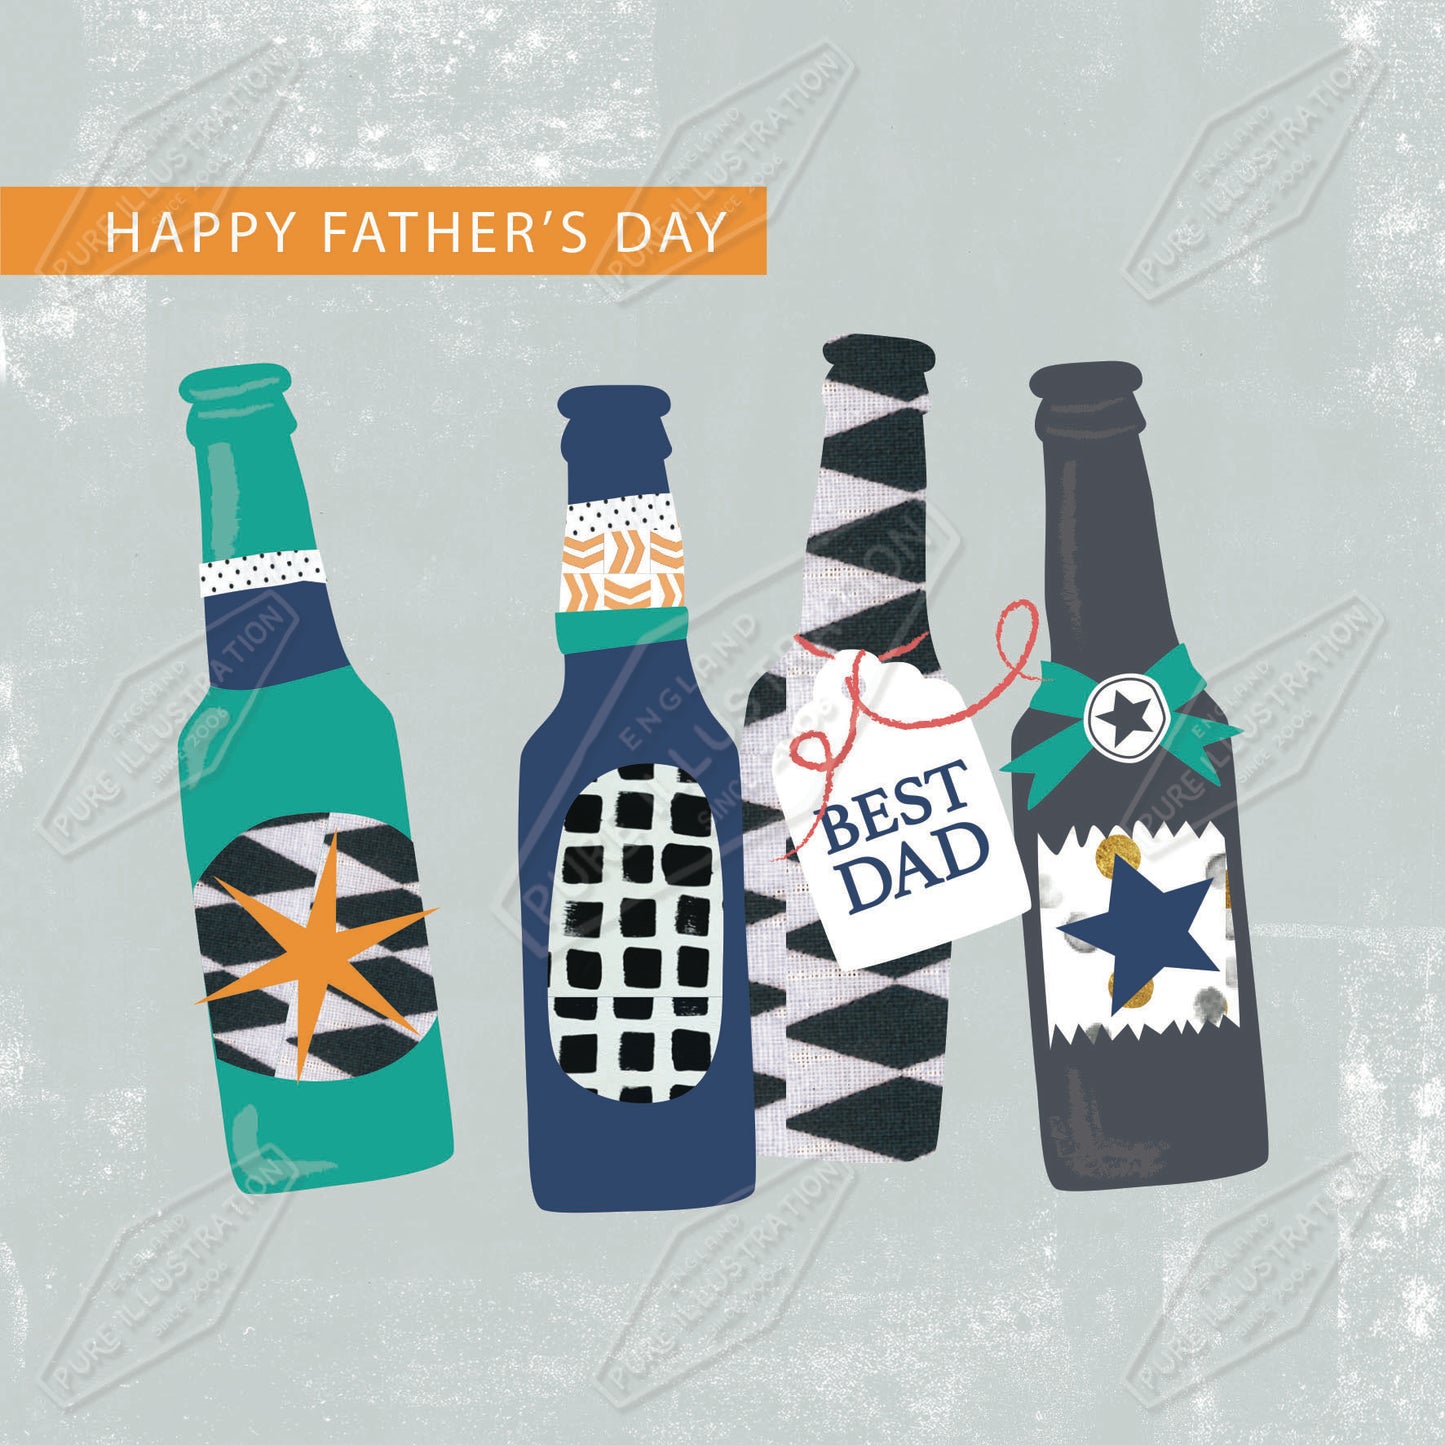 Fathers Day Beers Greeting Card Design Pure Art Licensing Agency